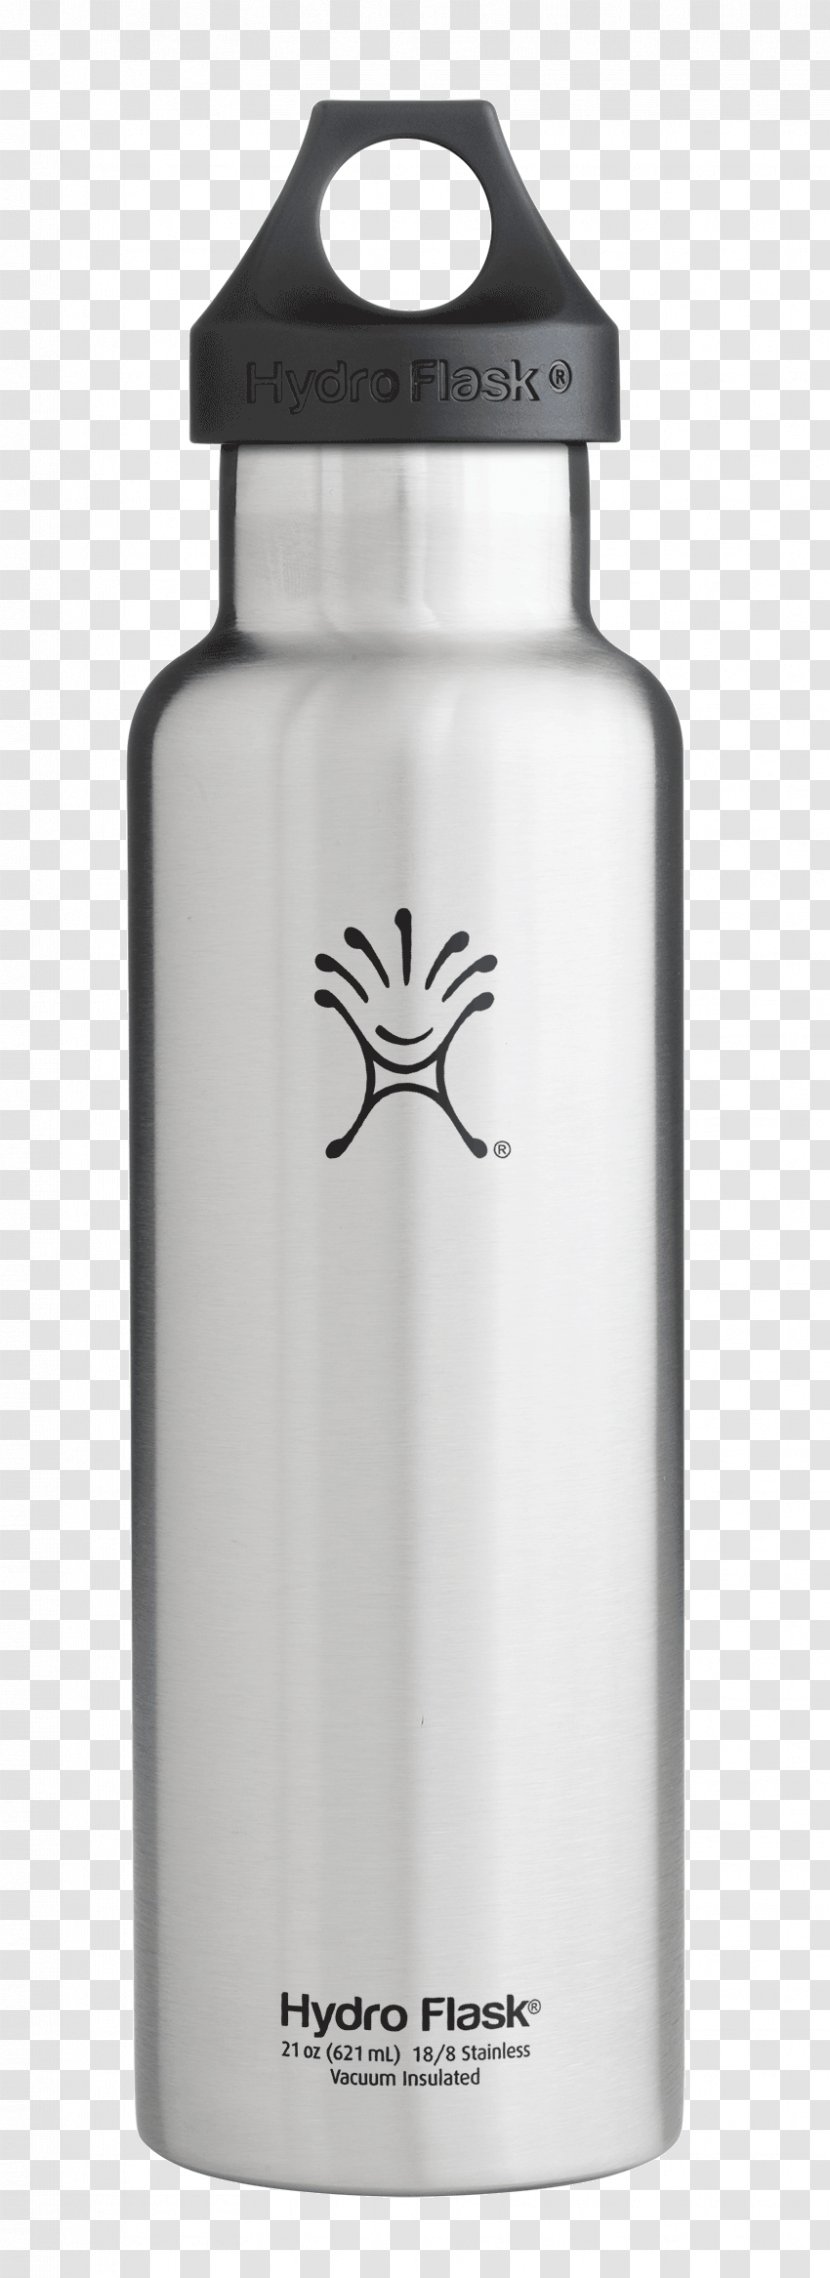 Water Bottles Thermal Insulation Vacuum Insulated Panel Hydro Flask - Neck - Bottle Transparent PNG